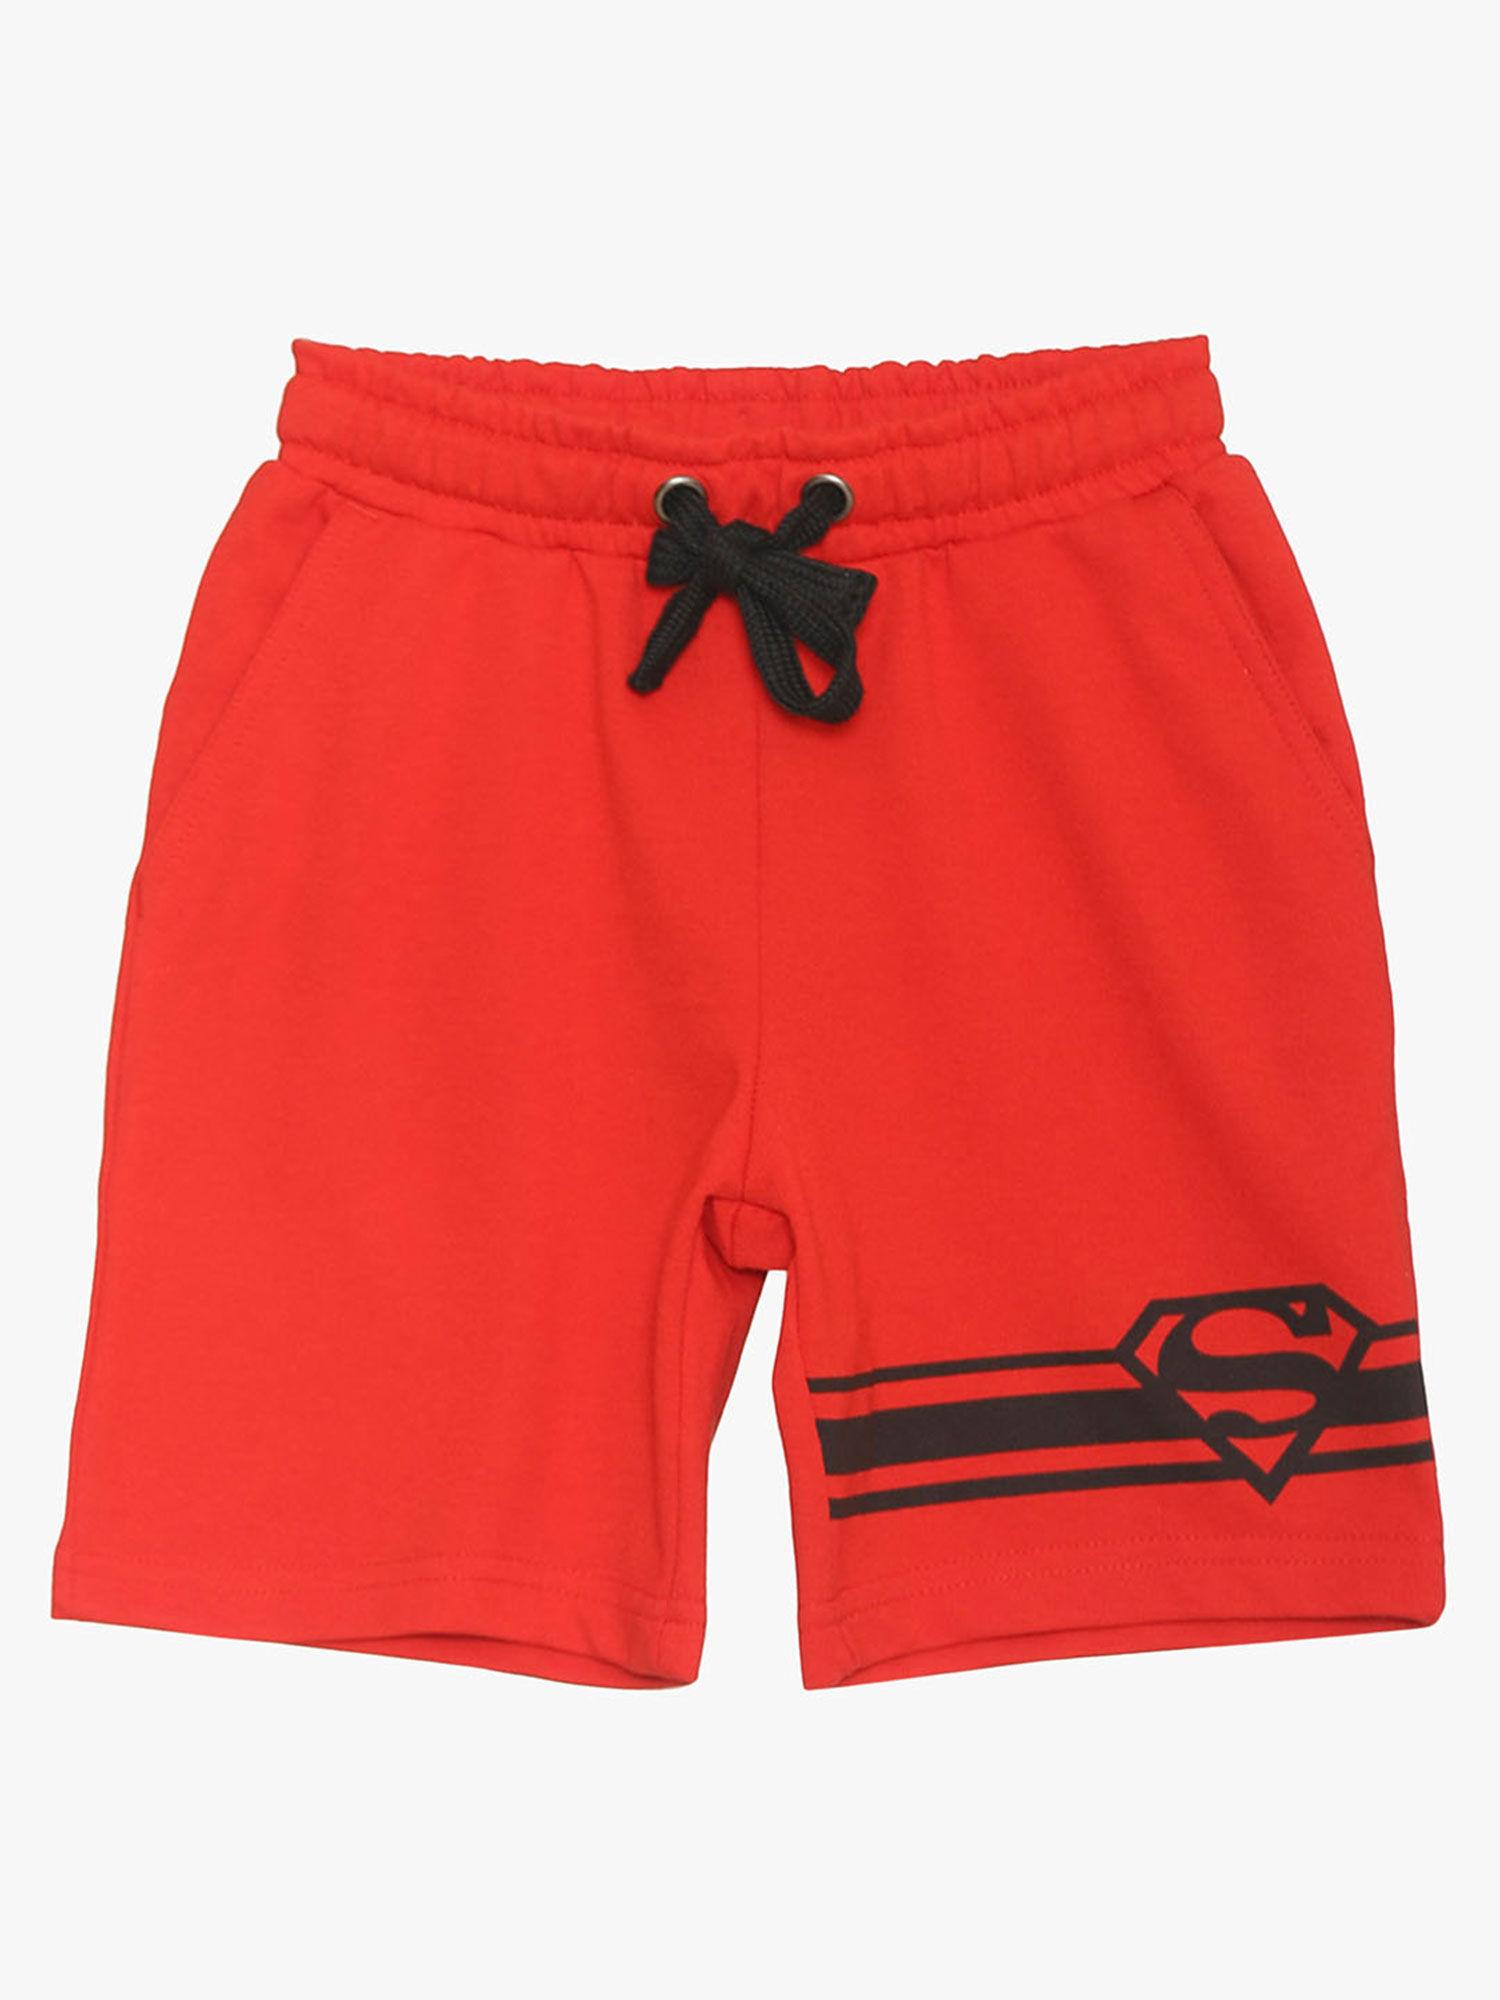 superman red shorts